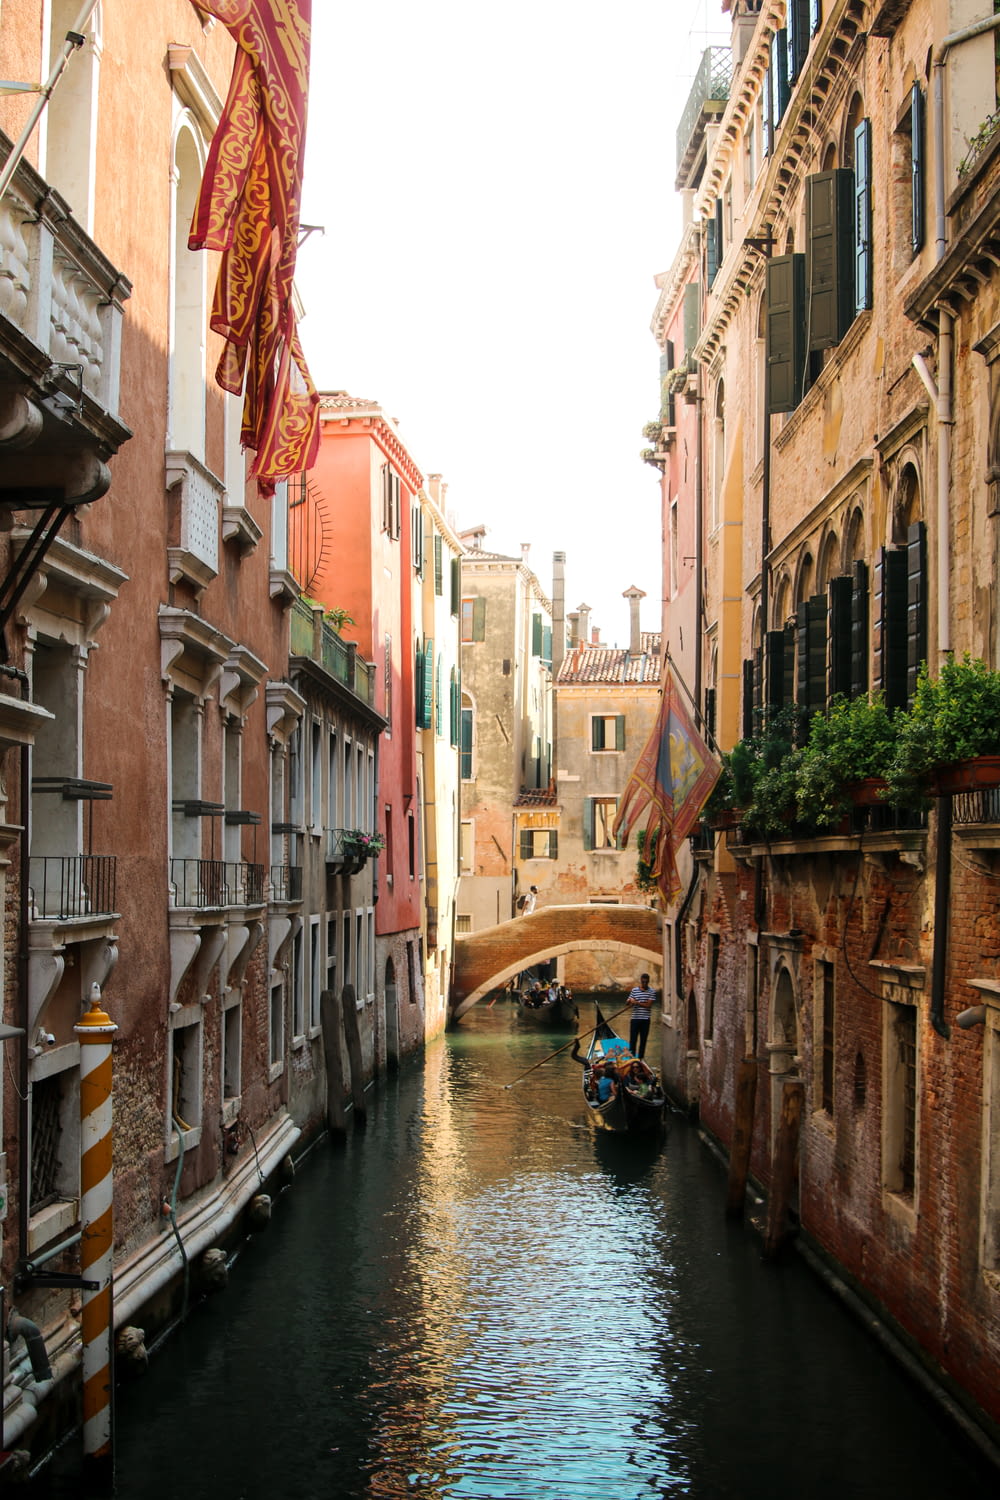 a narrow canal in a city with buildings on both sides